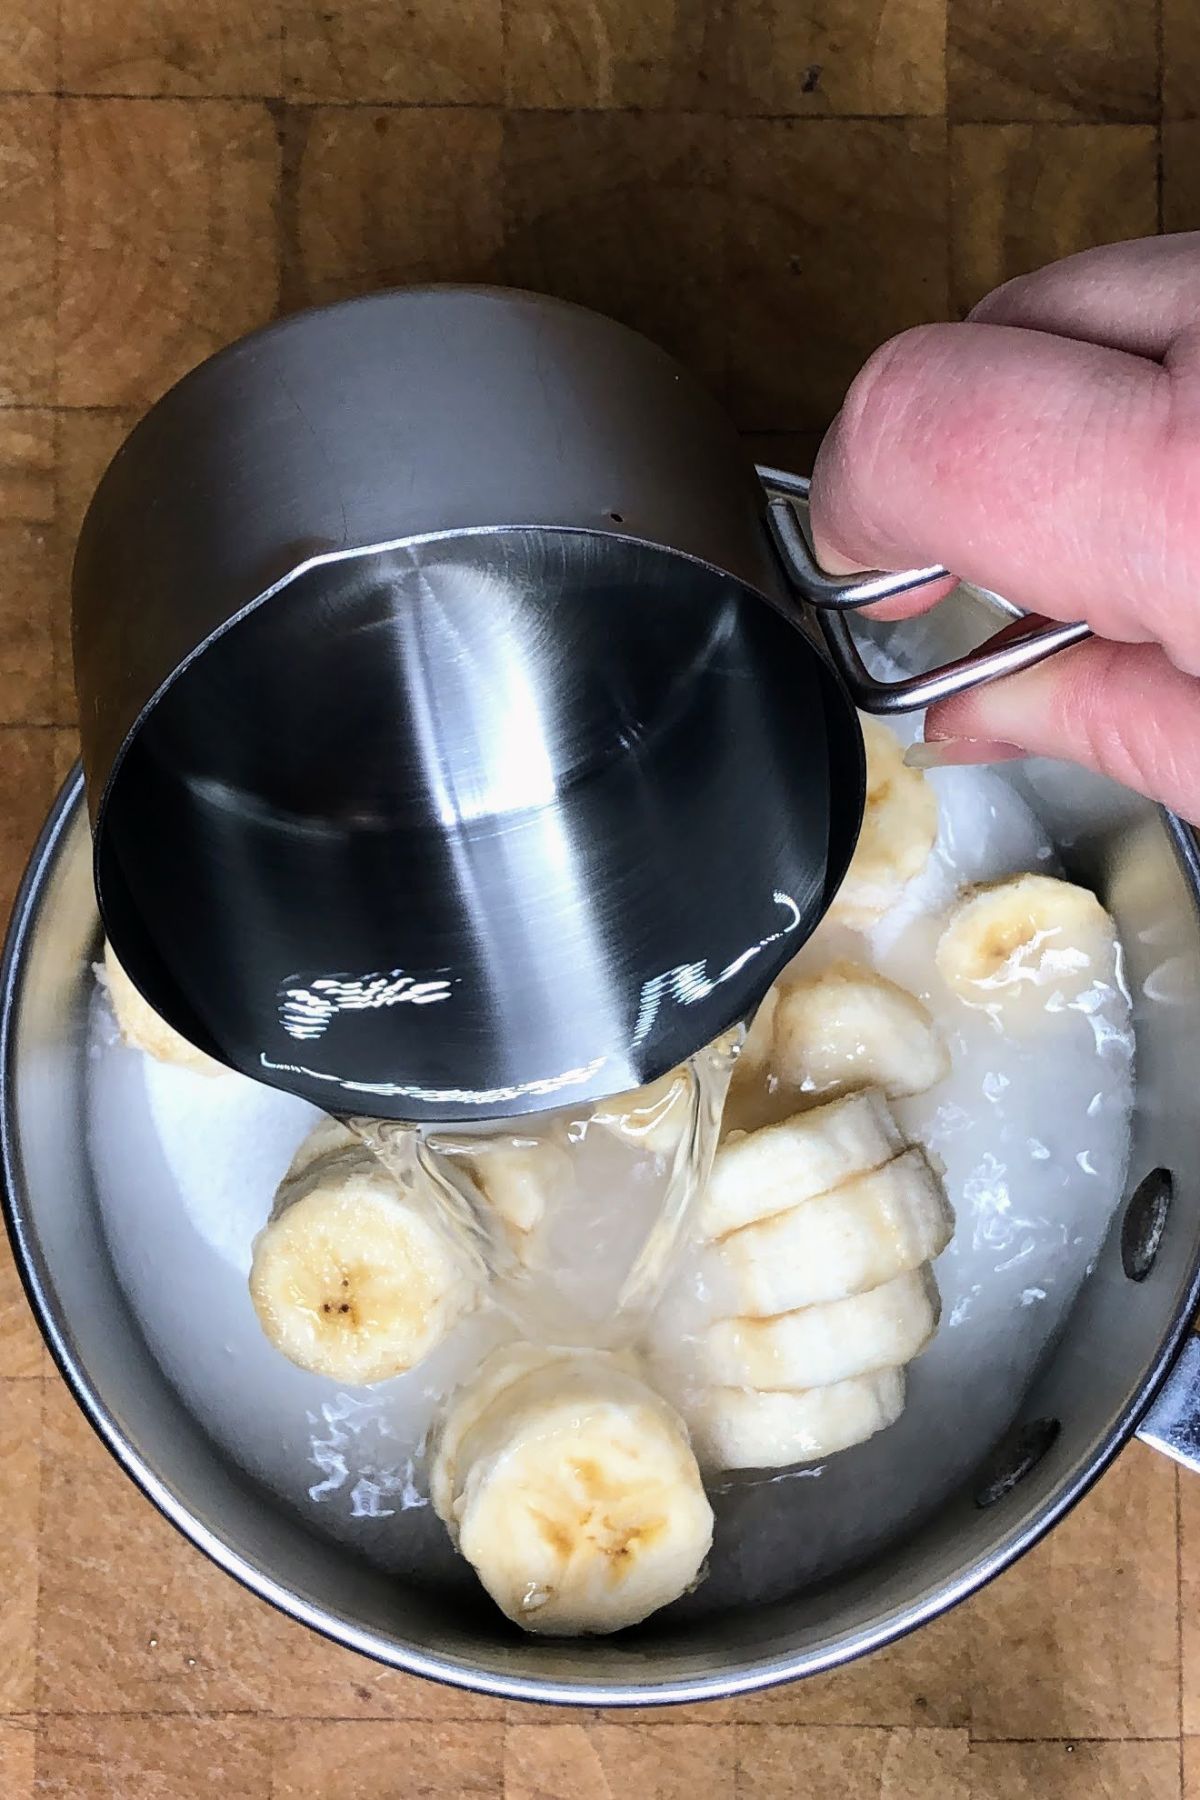 Pouring water into a pot with banana slices.